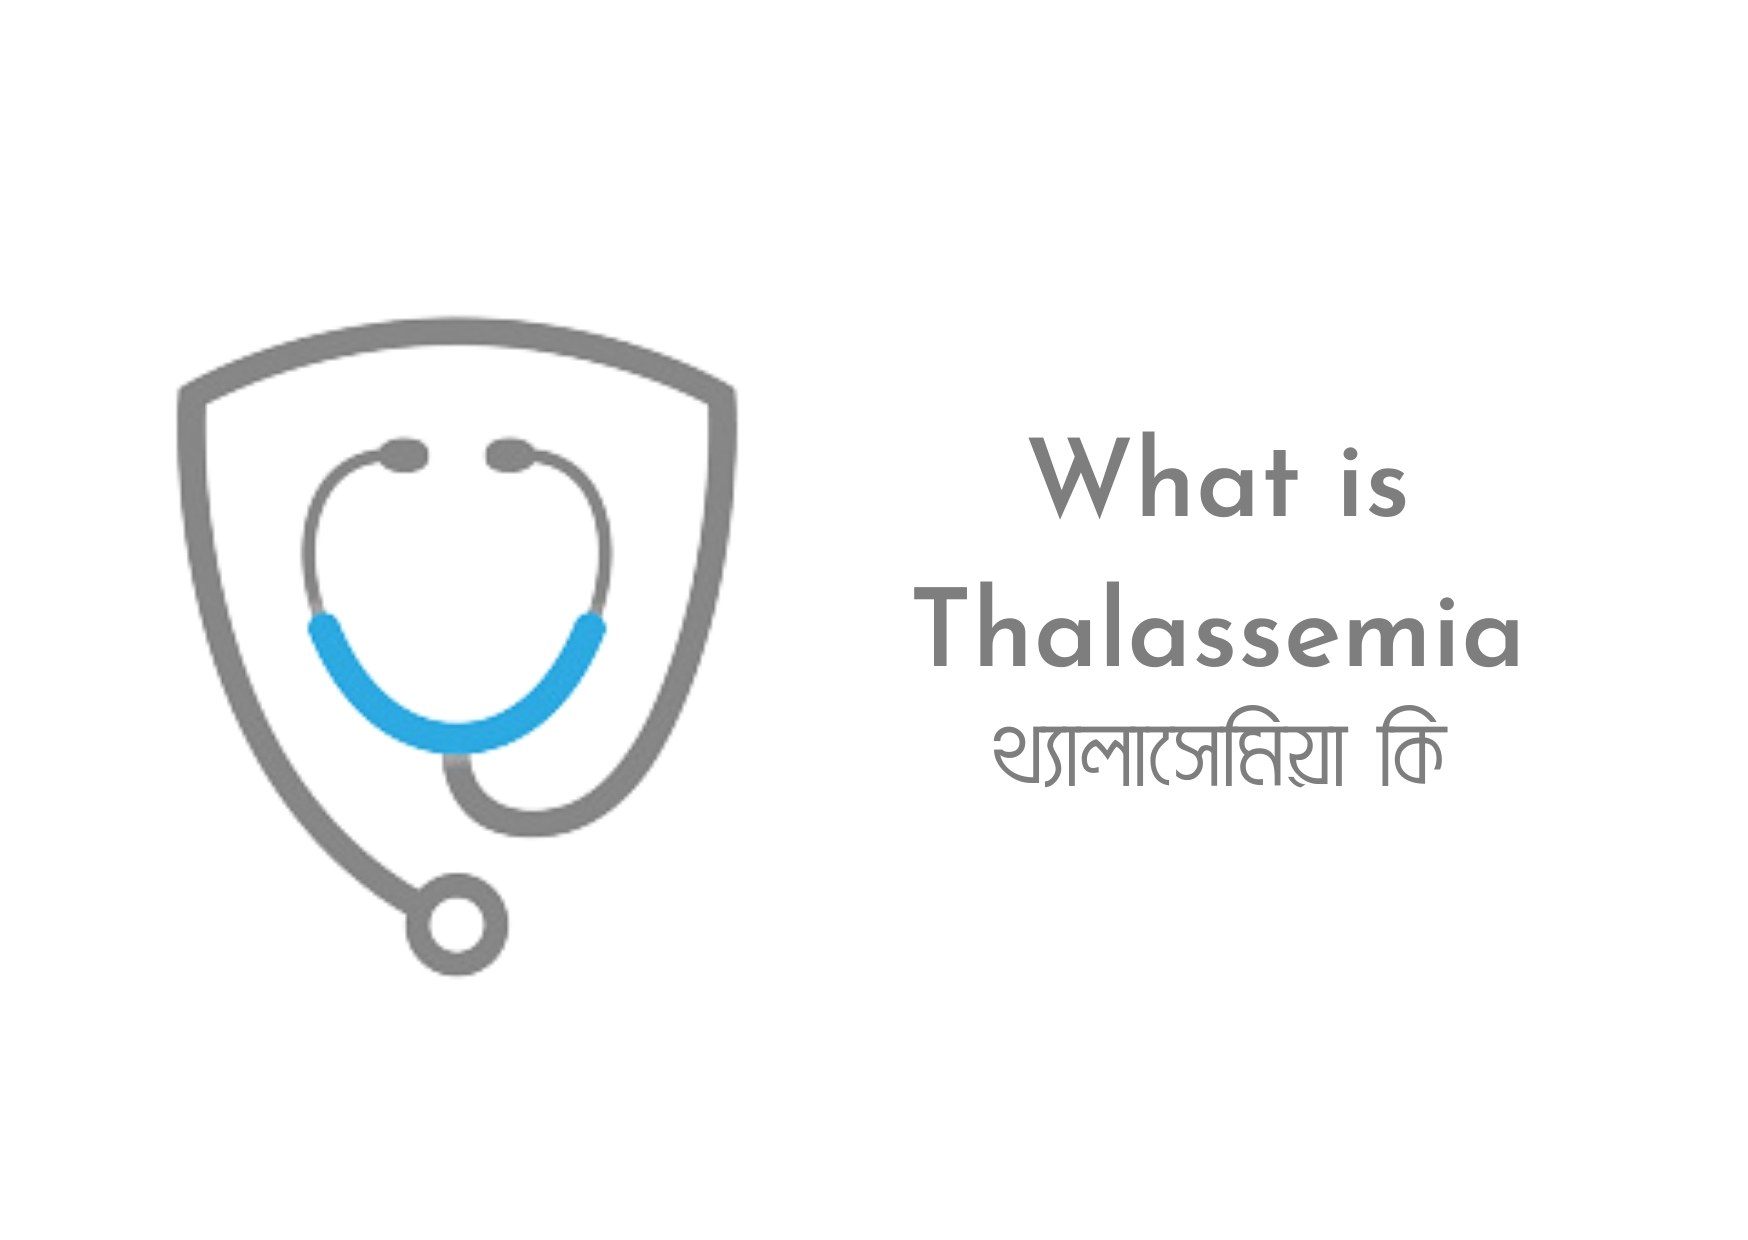 What is thalassemia